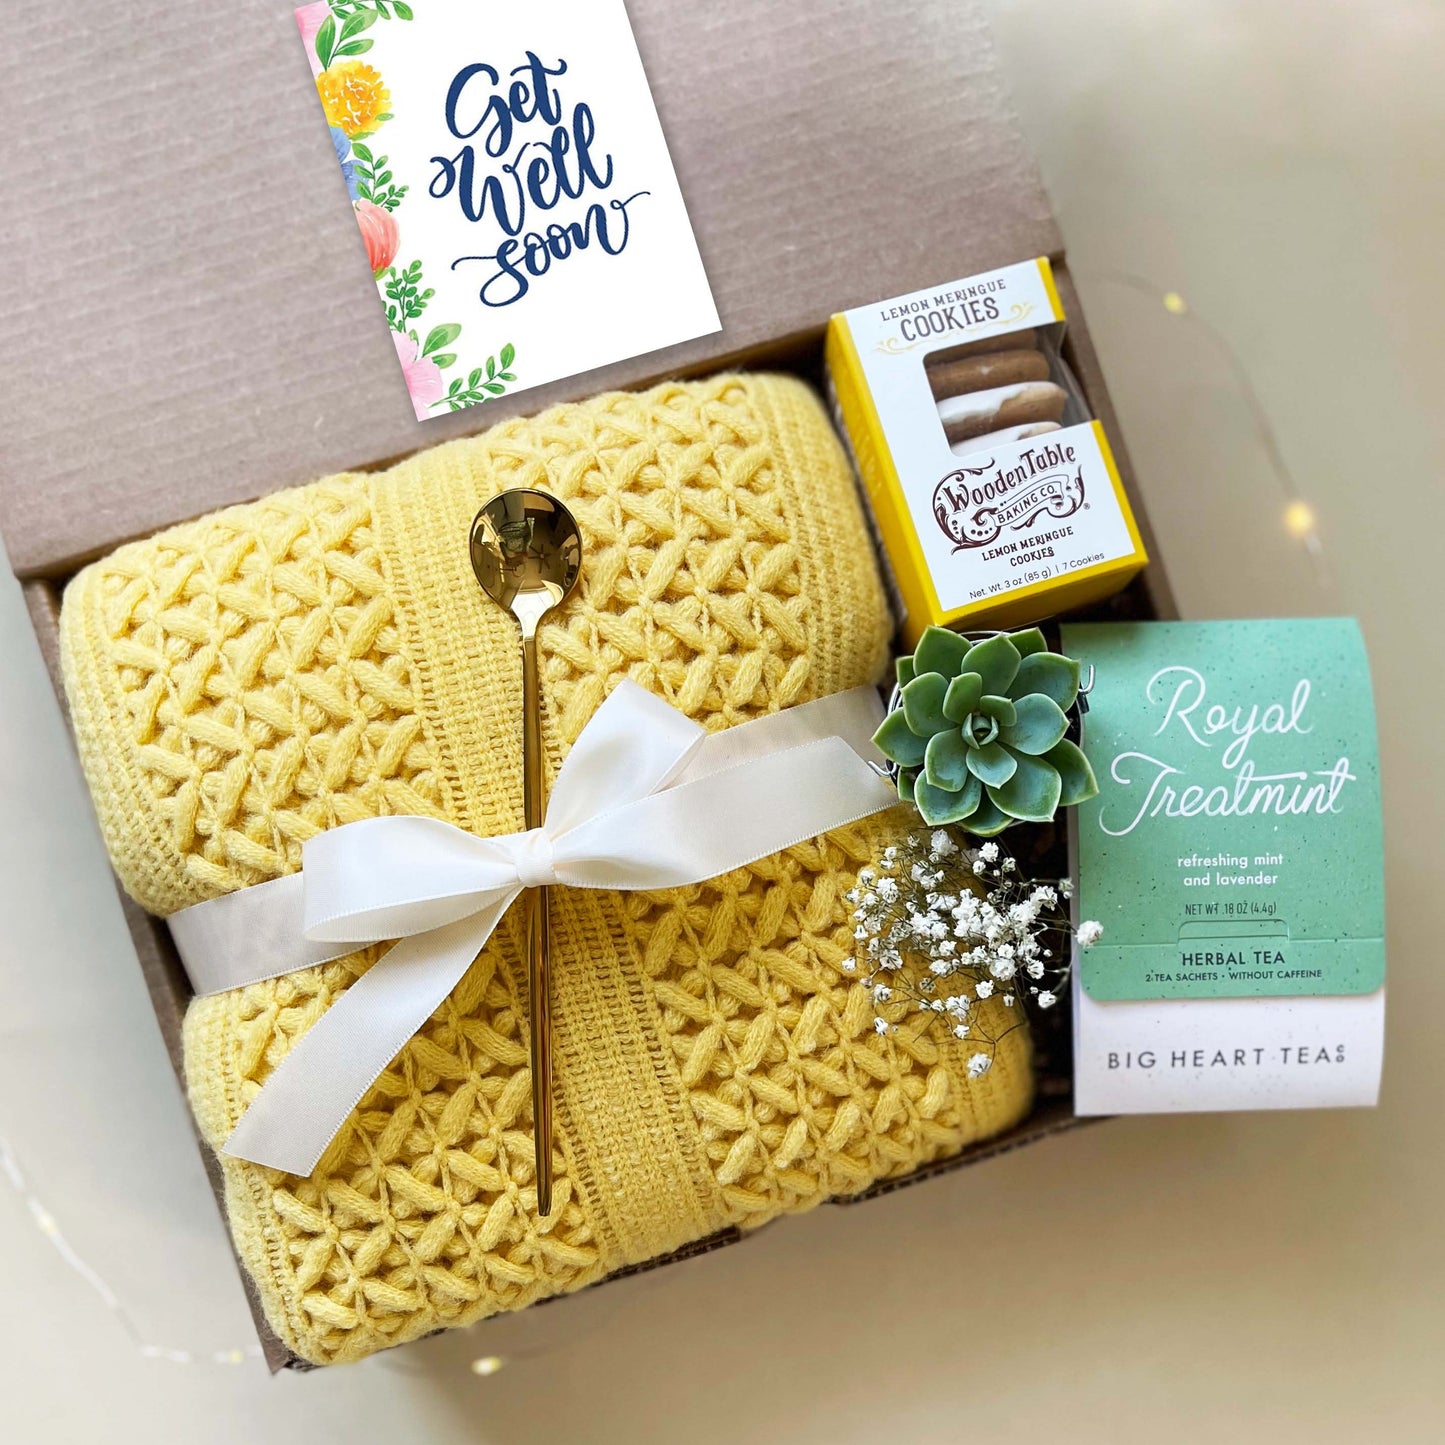 Get Well Gift Box of Comfort- get well soon gifts for women - get